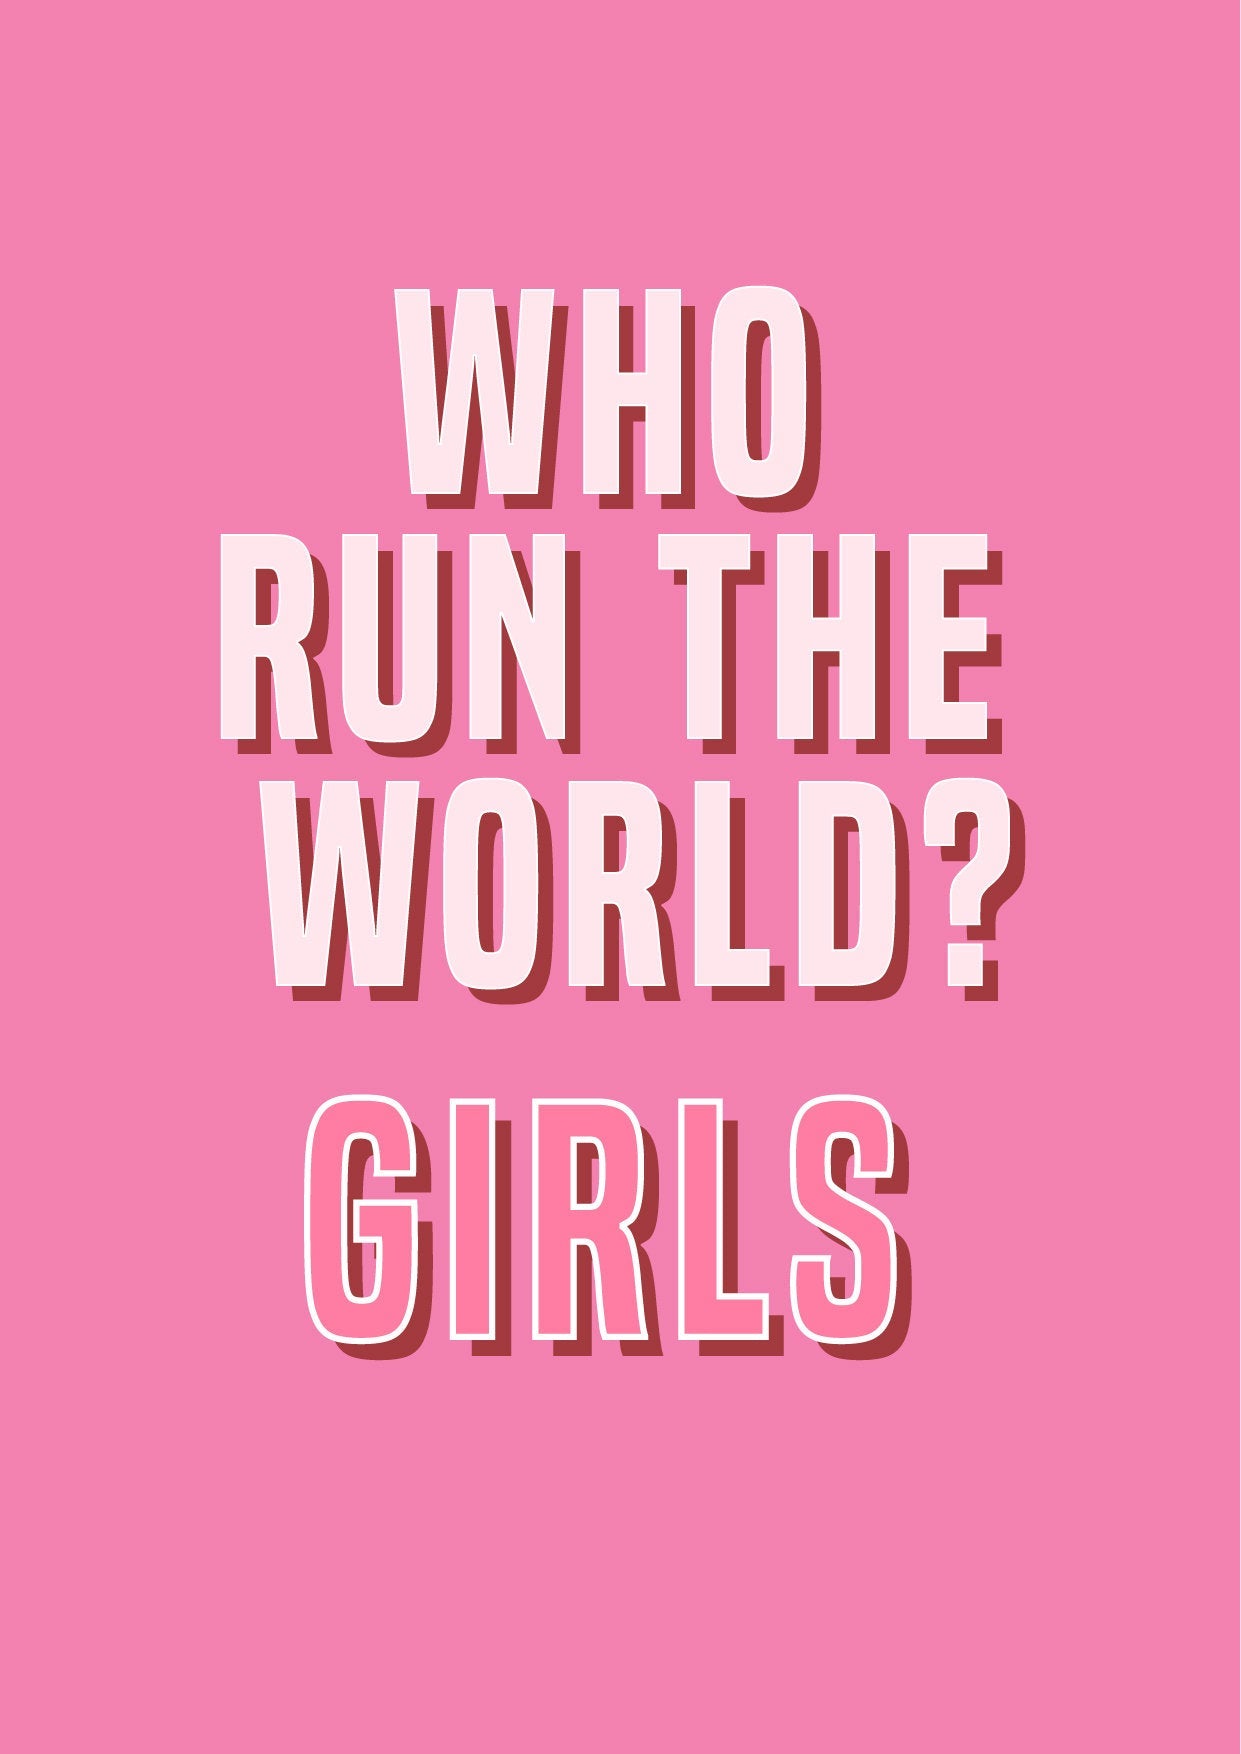 Who Run The World? Motivational Quote Girls typography